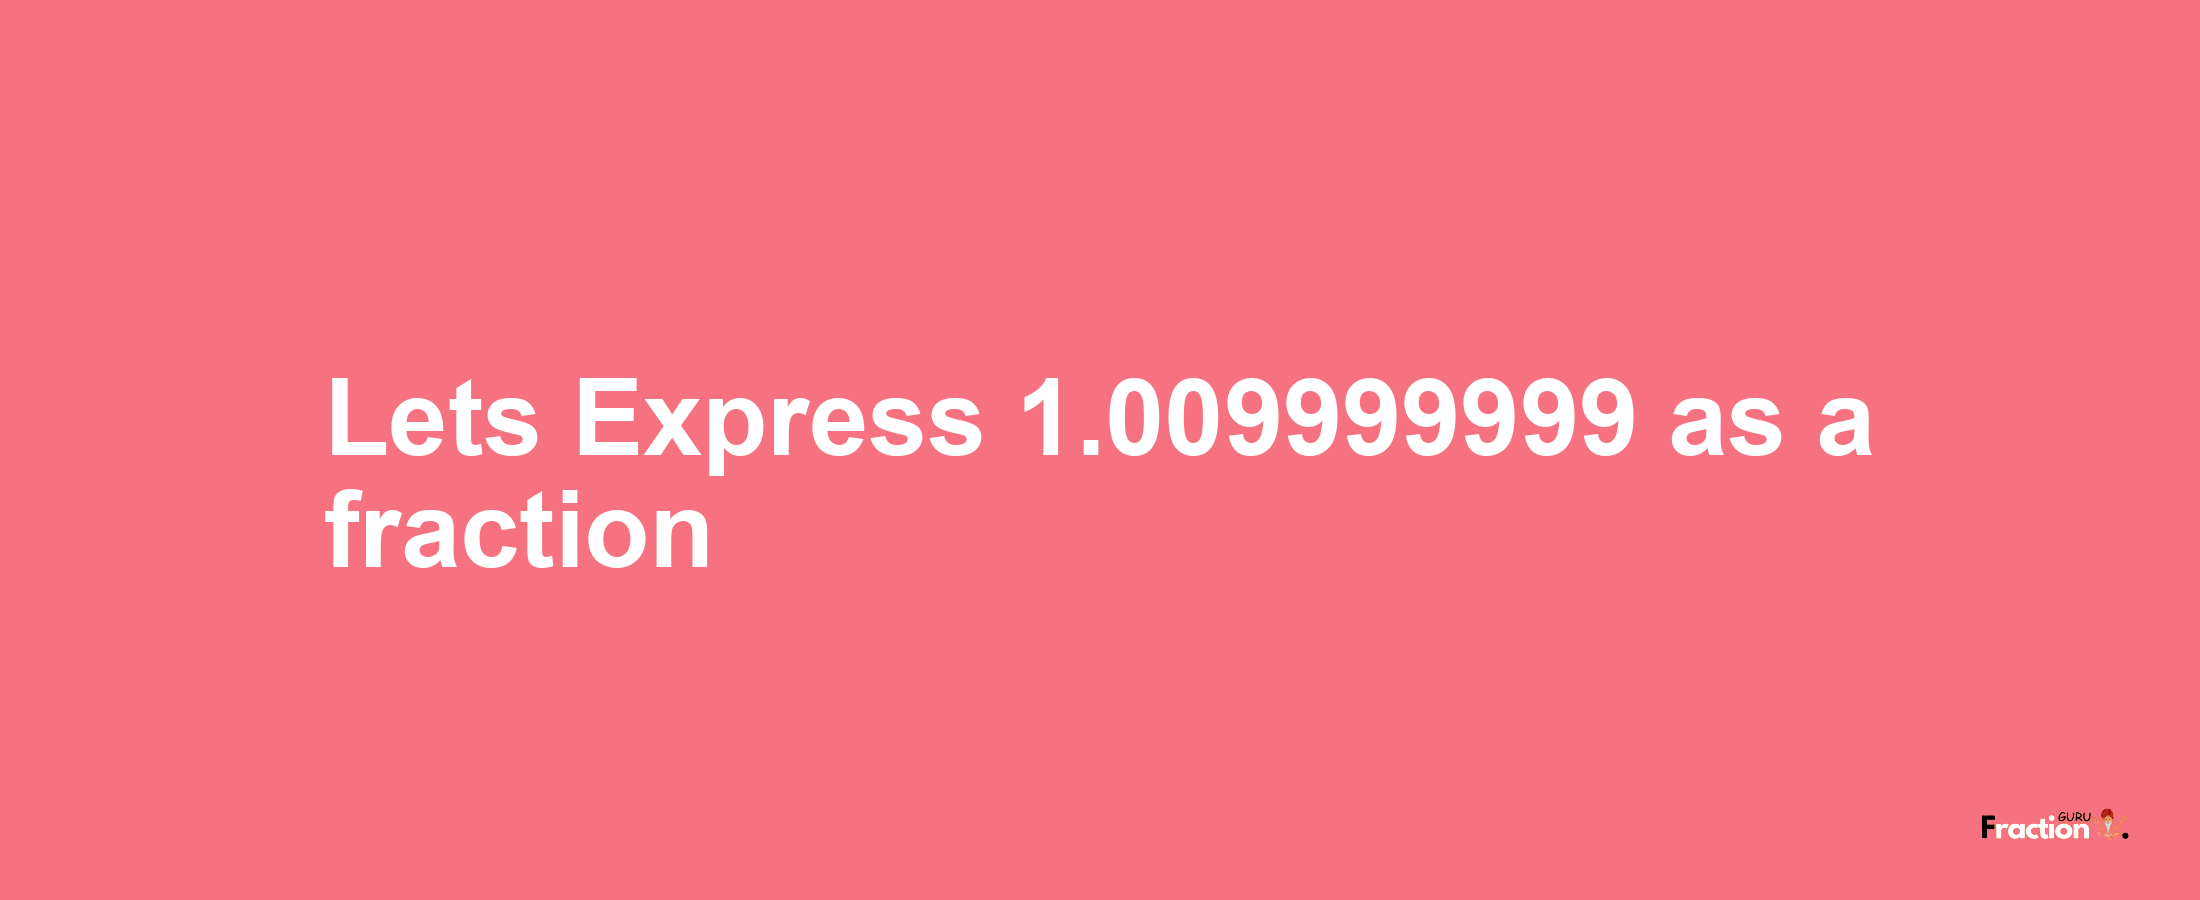 Lets Express 1.009999999 as afraction